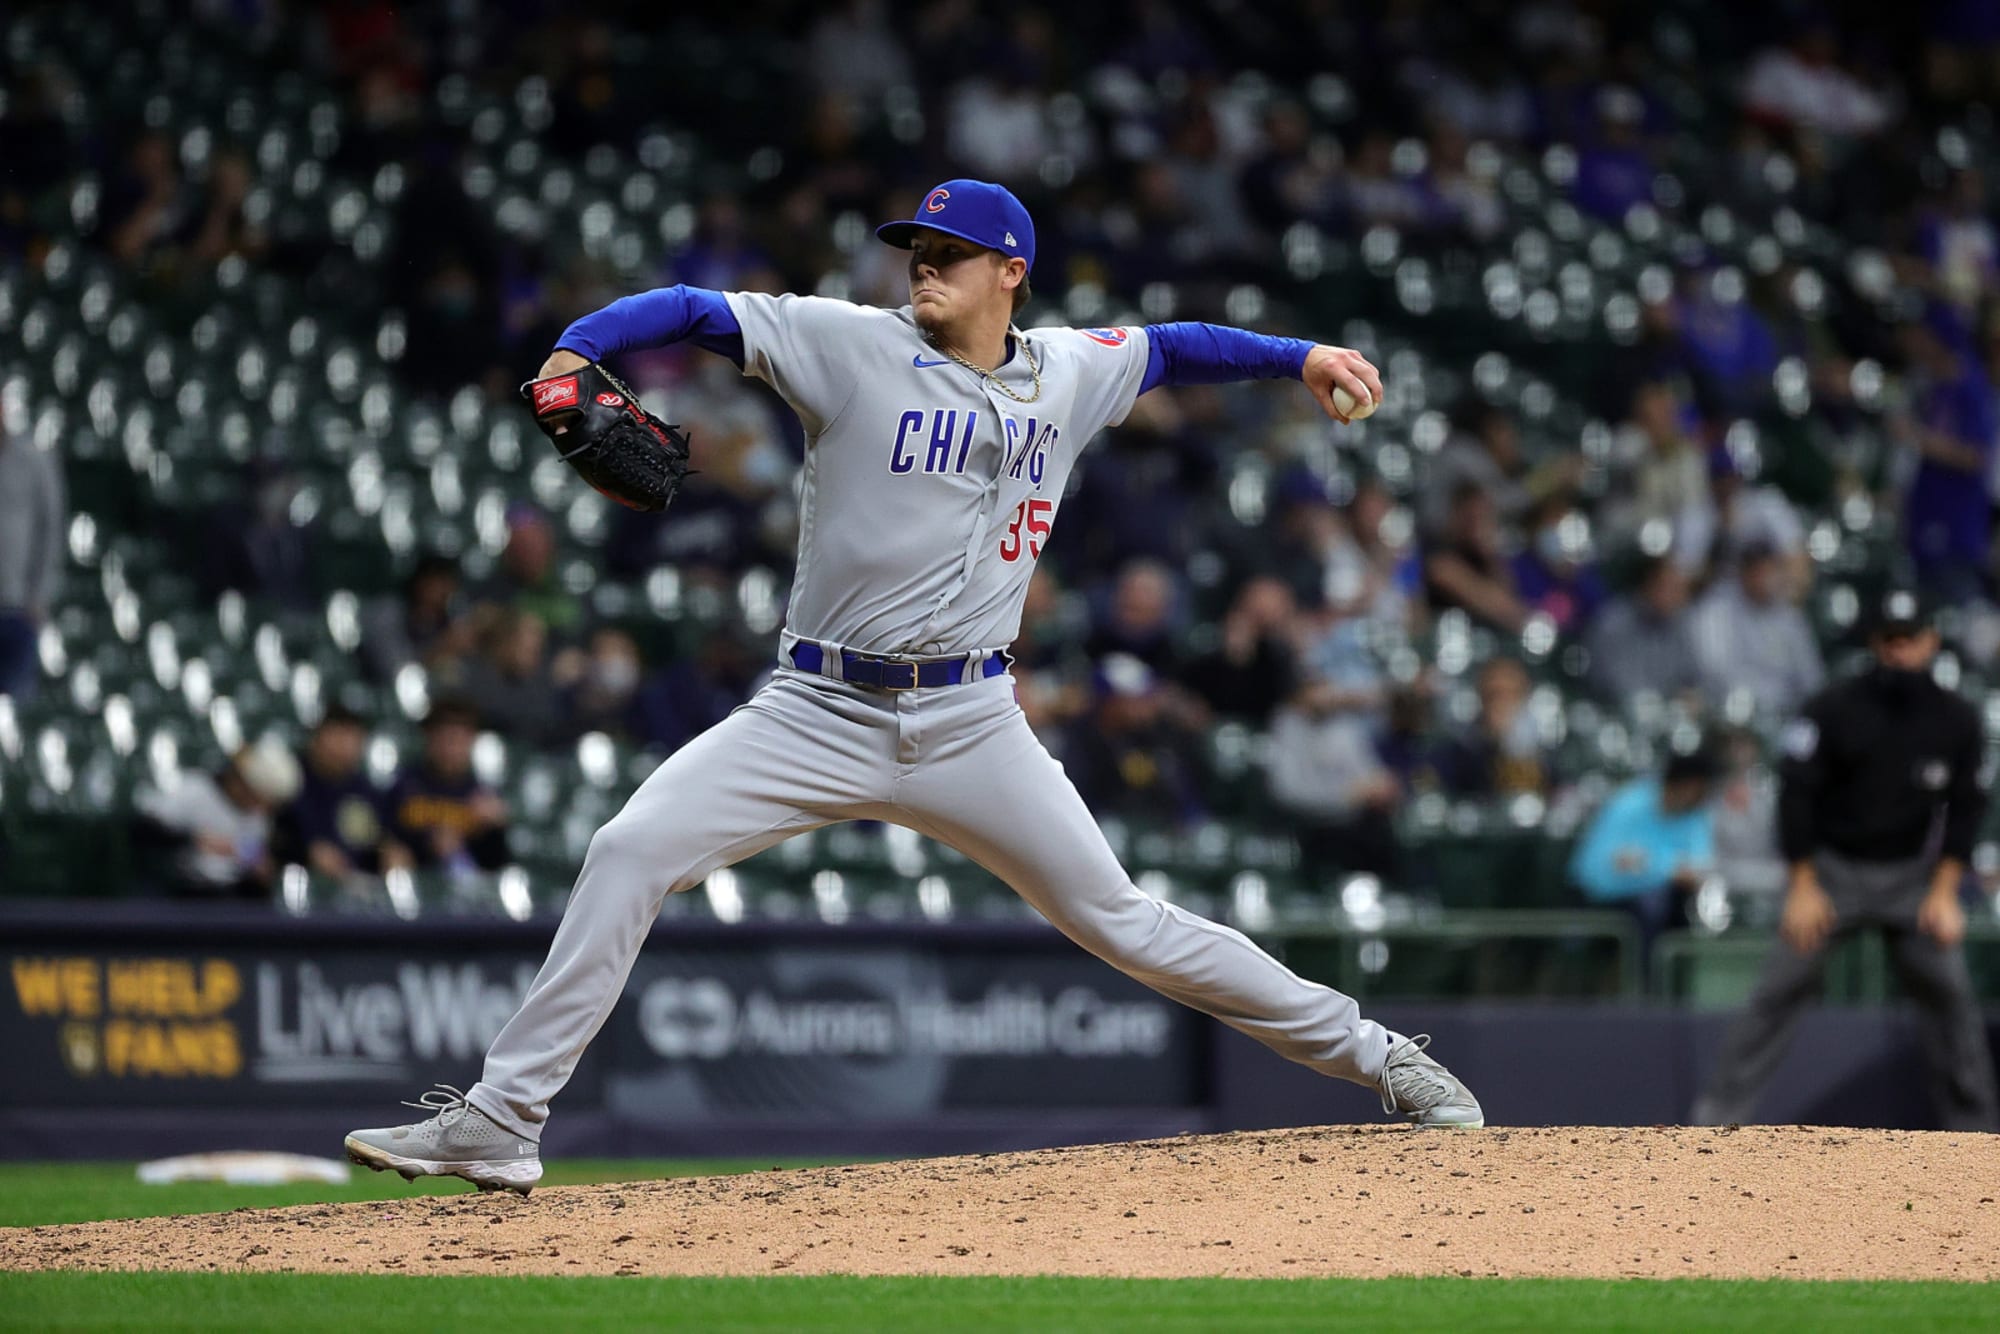 Cubs: Justin Steele and Brad Wieck have big shoes to fill in relief